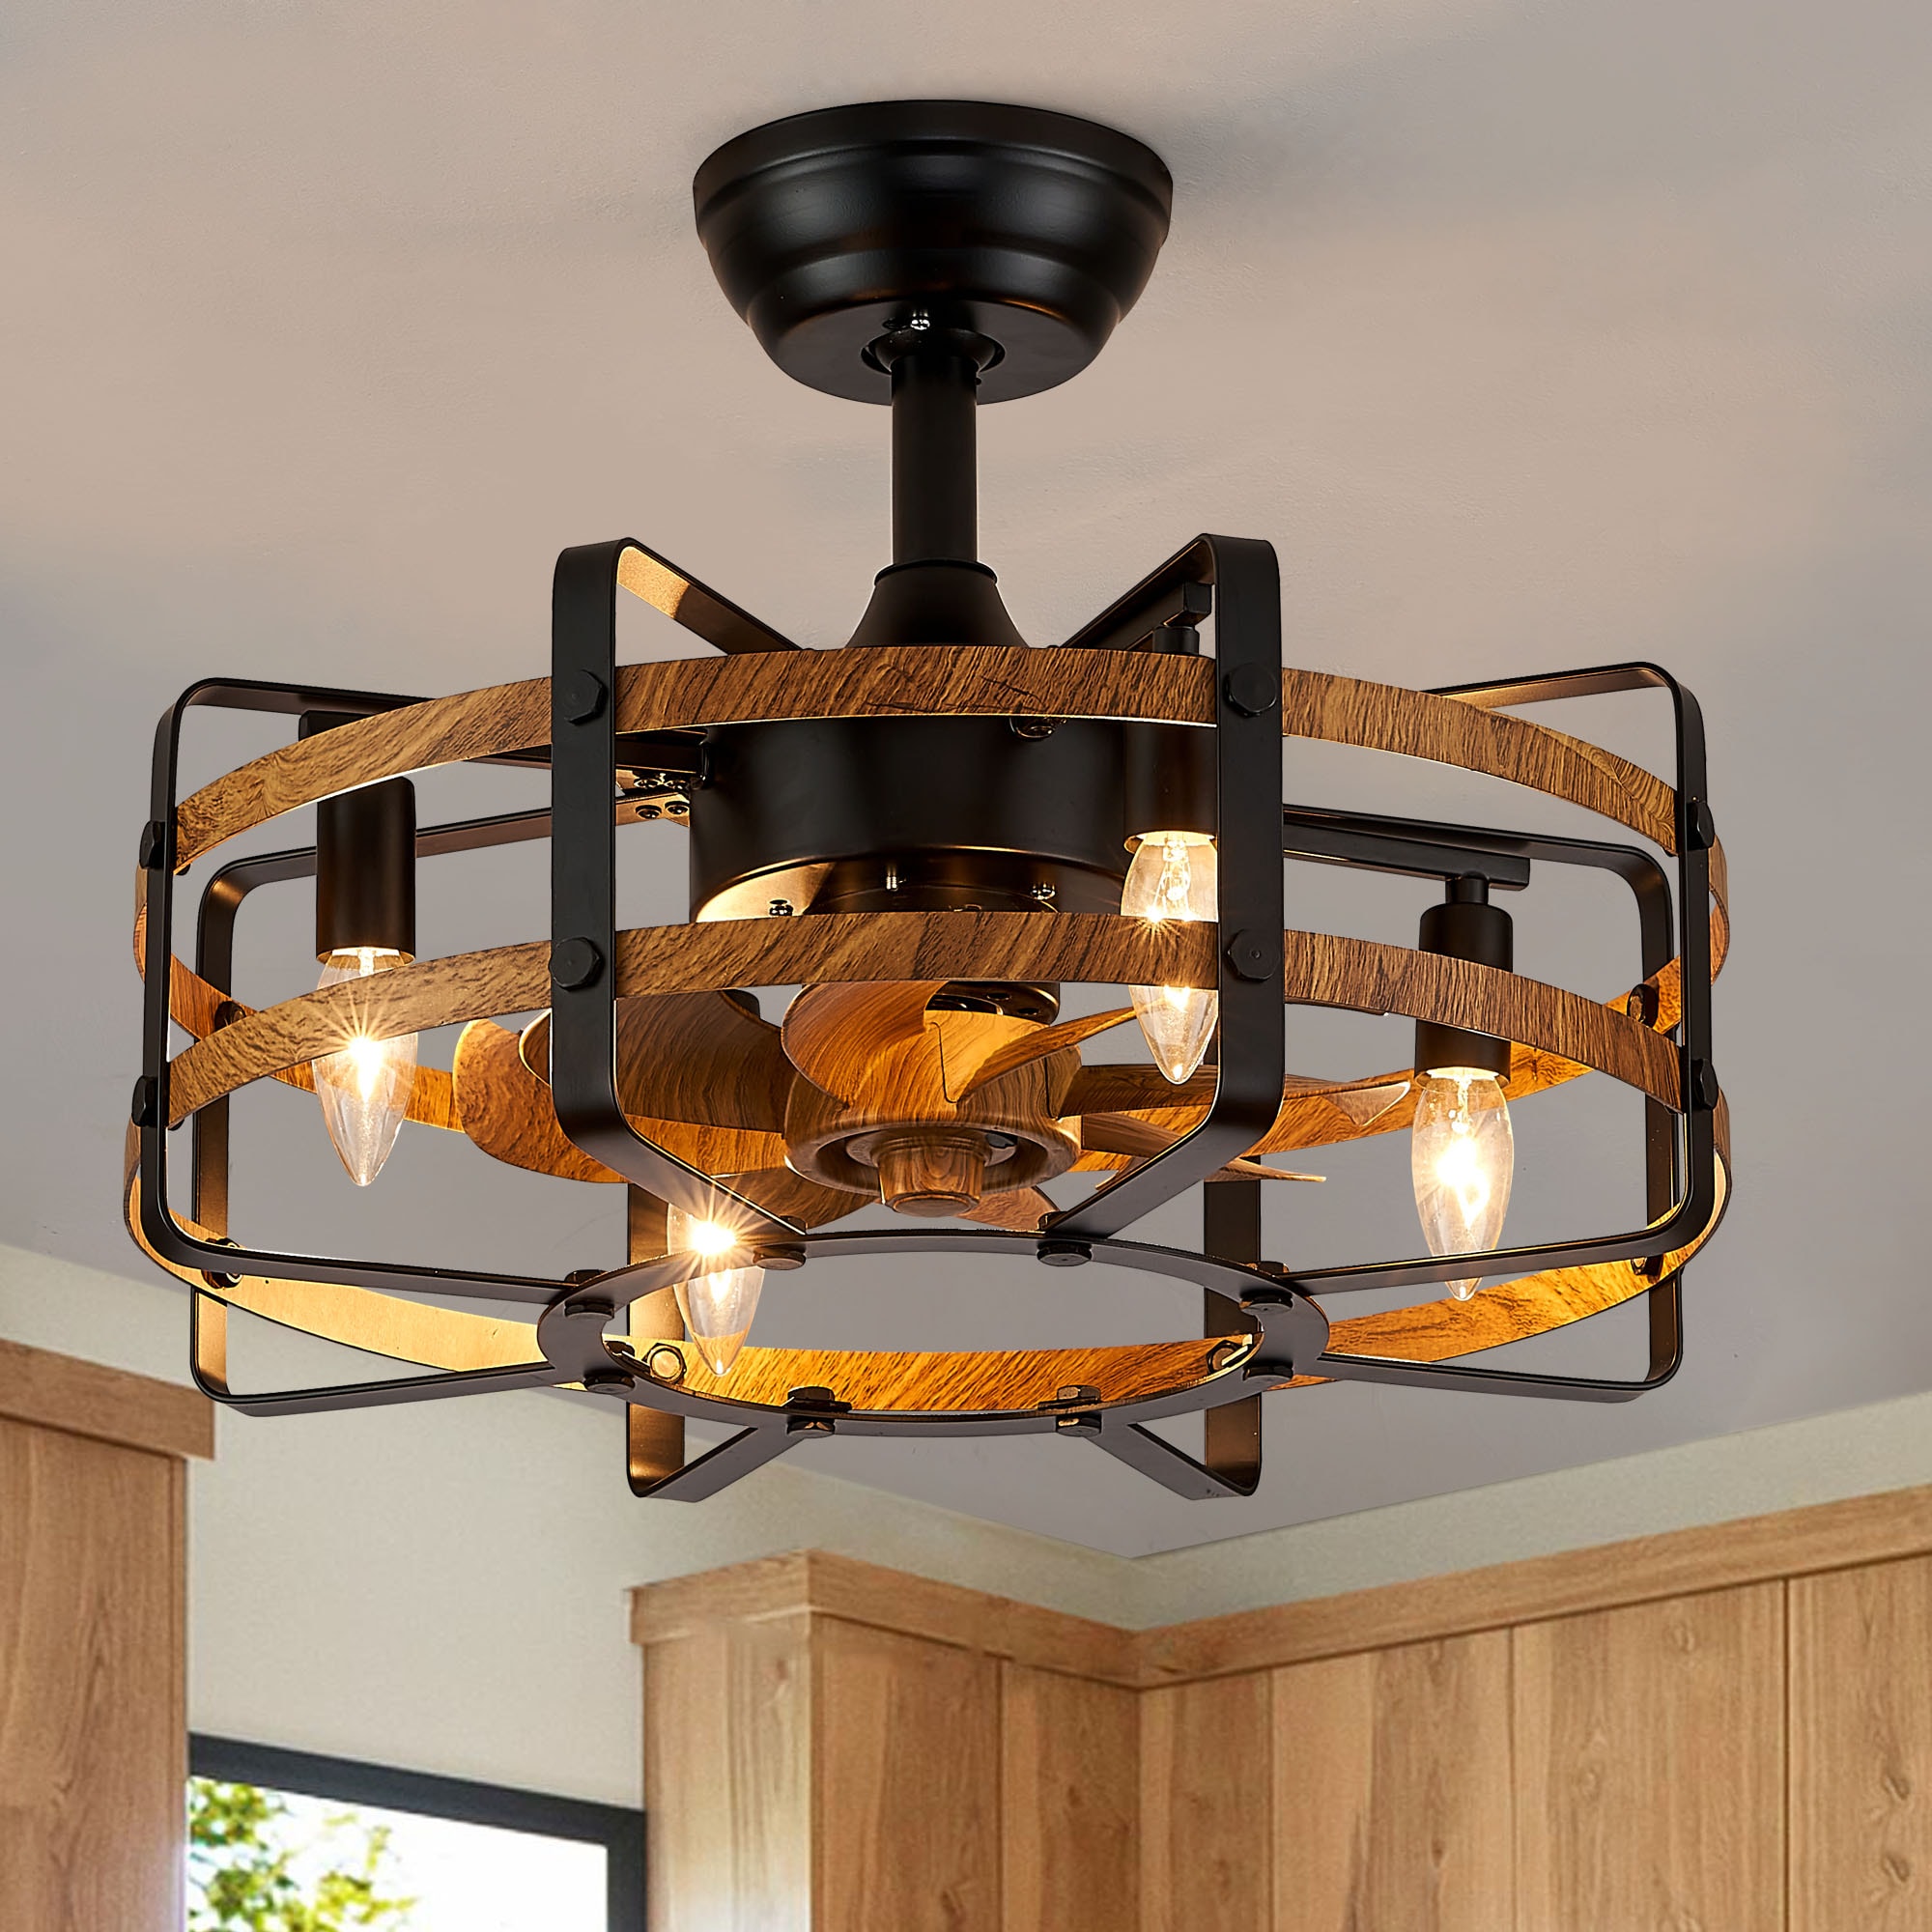 and Fans the Fandelier Profile Ceiling Wood in Black Grain Indoor department Remote (8-Blade) 20-in Cage Ceiling Farmhouse Antoine Fan Low Modern at